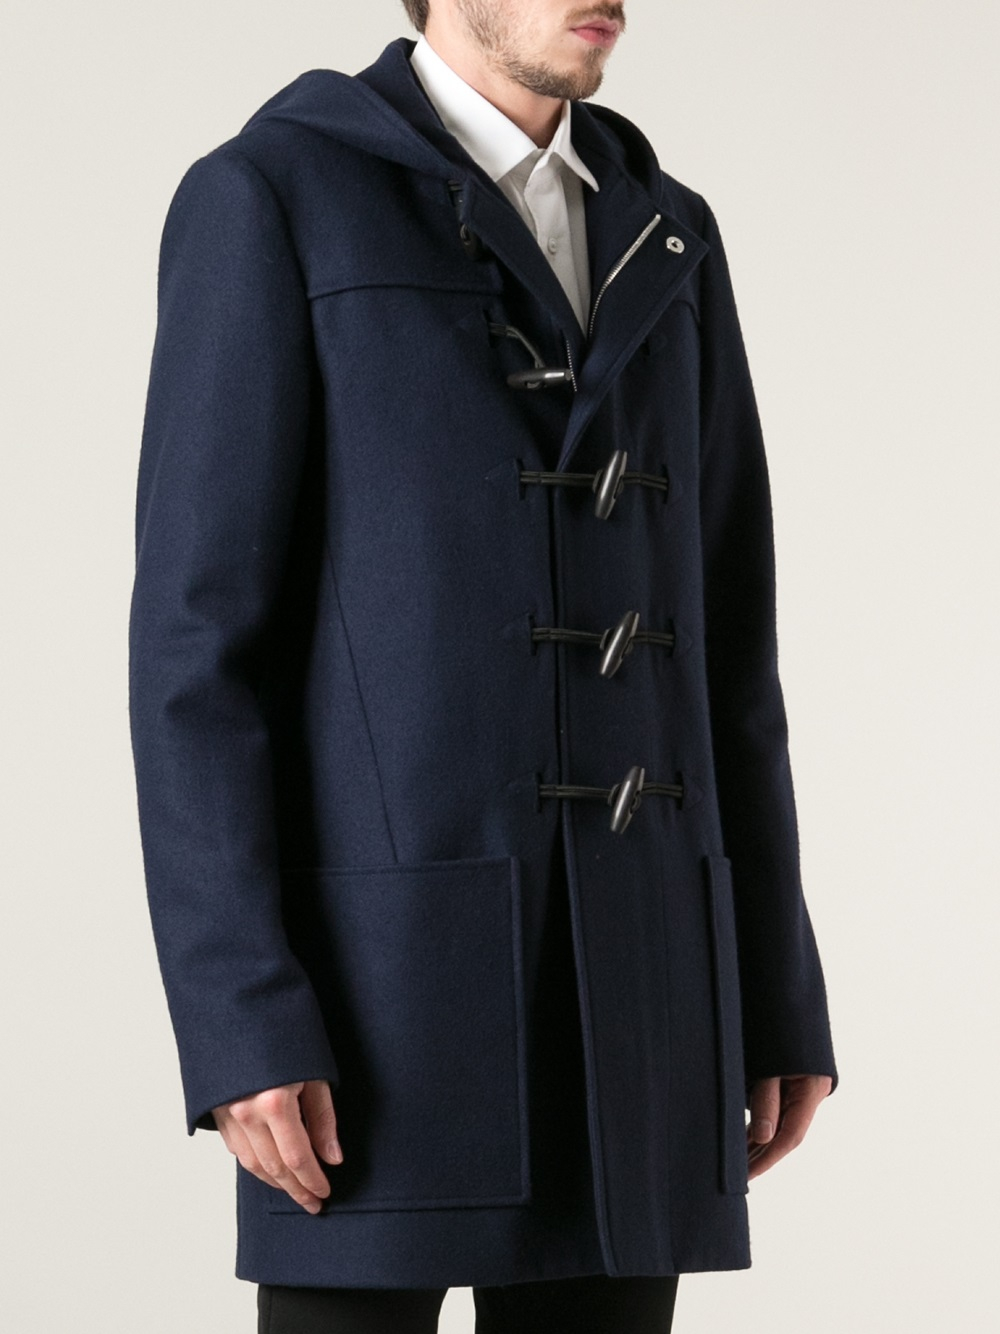 Dior Homme Duffle Coat in Blue for Men | Lyst